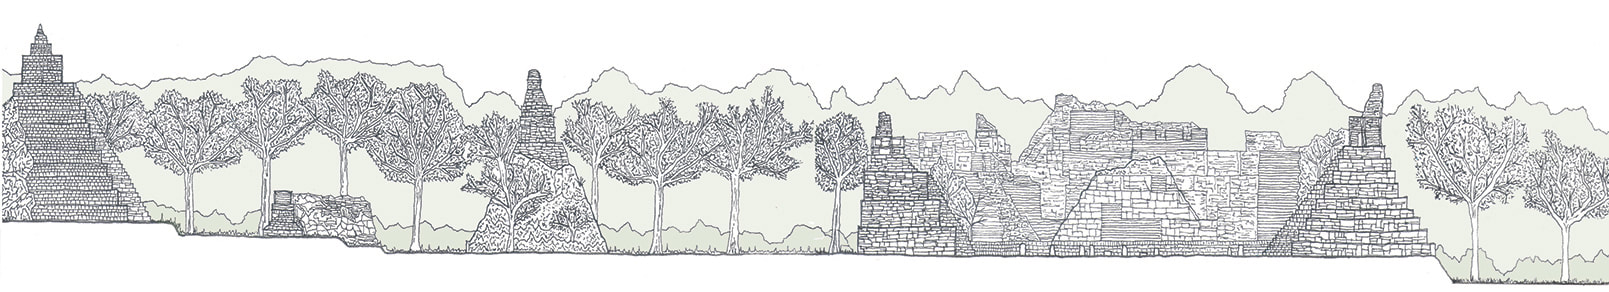 Pen, ink and pencil drawing of Tikal, ancient Mayan site in Guatemala